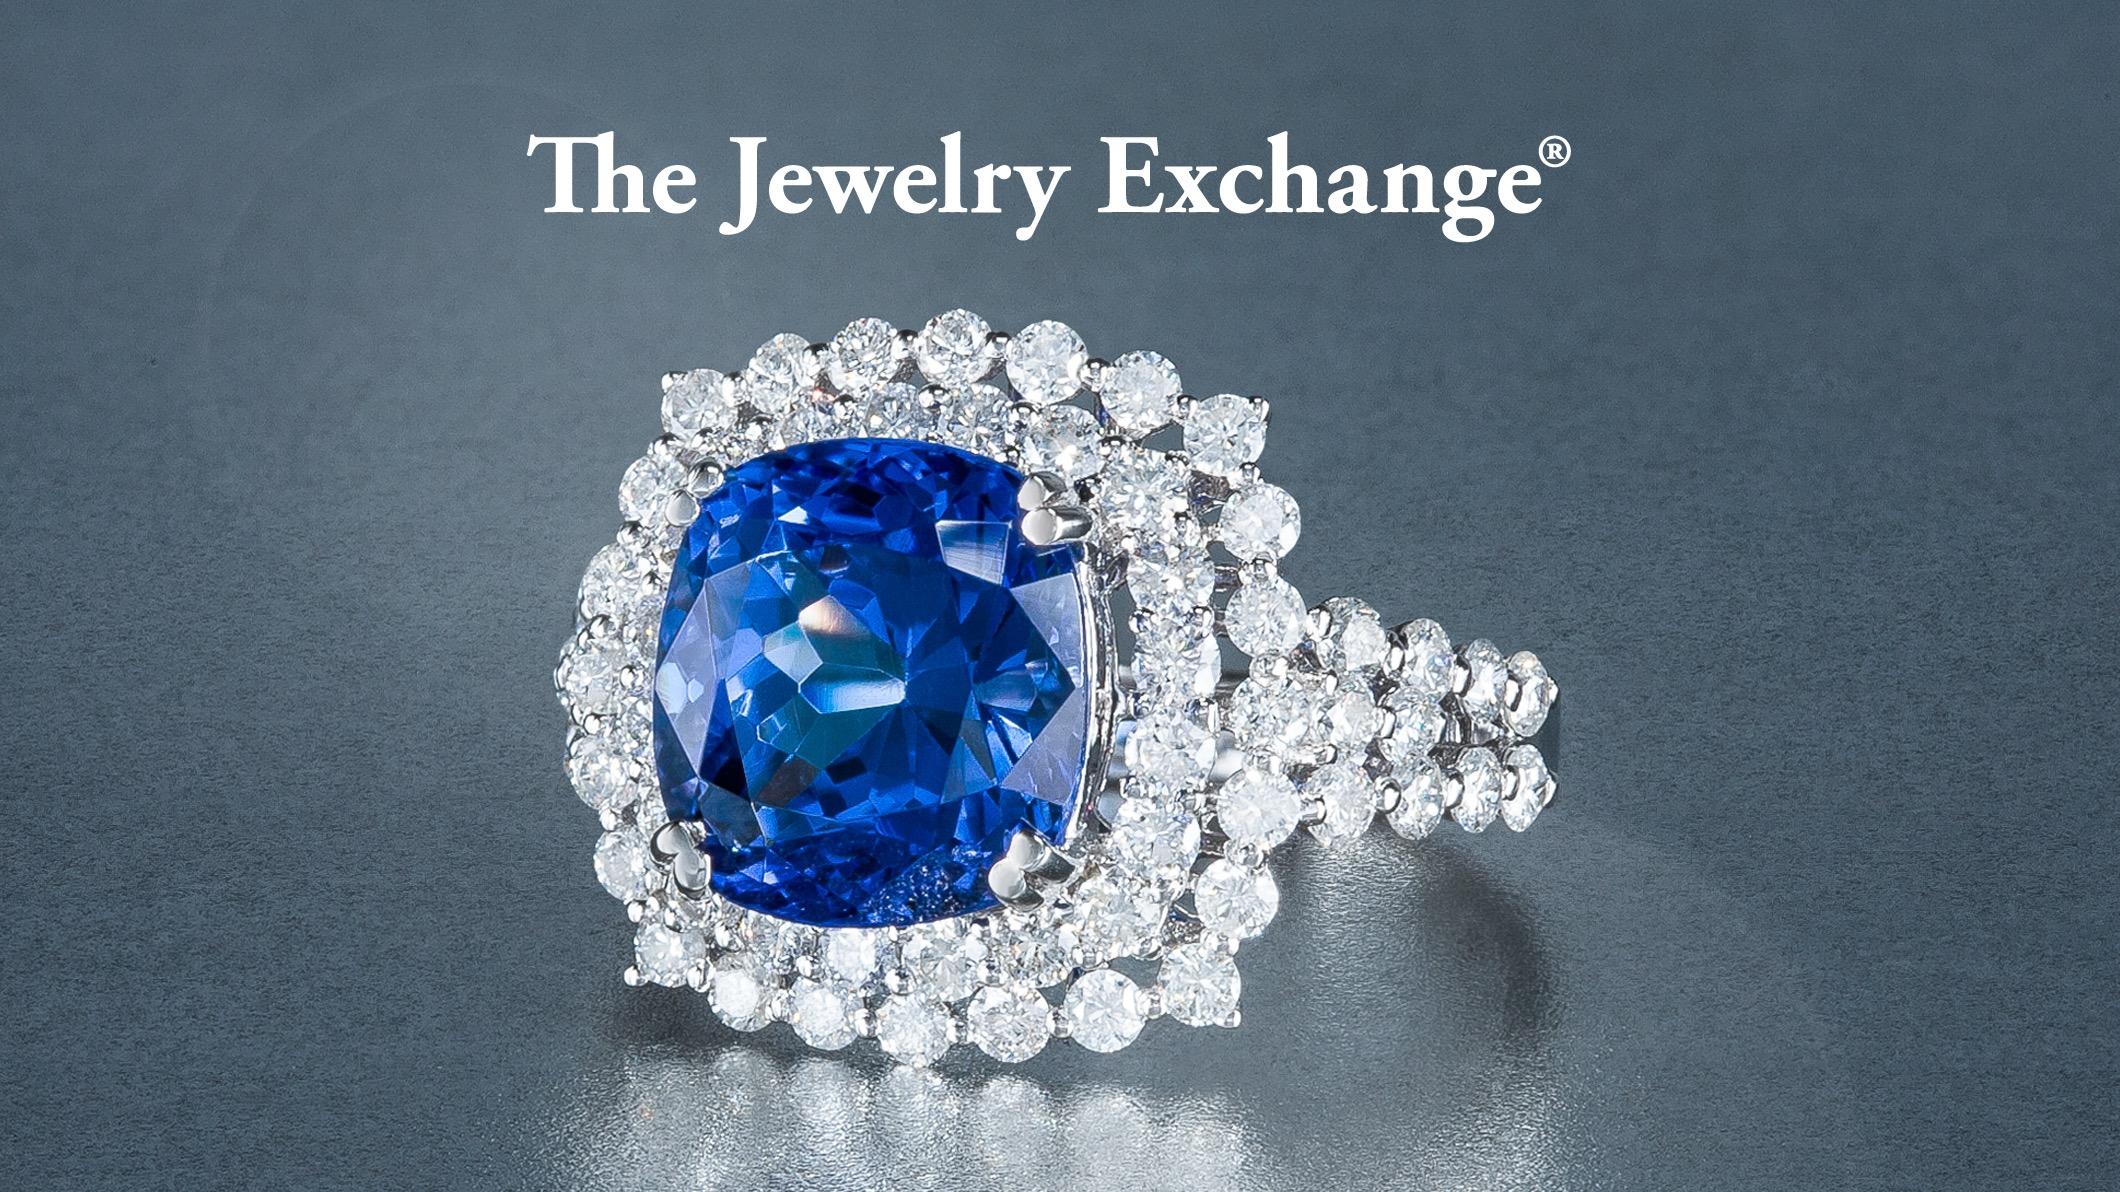 The Jewelry Exchange offers many types of gemstone jewelry to dazzle on any occasion. Our ruby's, sapphires, emeralds and tanzanite gemstones can be placed on rings, studs, pendants and bracelets. Visit our website or stop by one of our locations to take advantage of our diamond and gemstone sales.